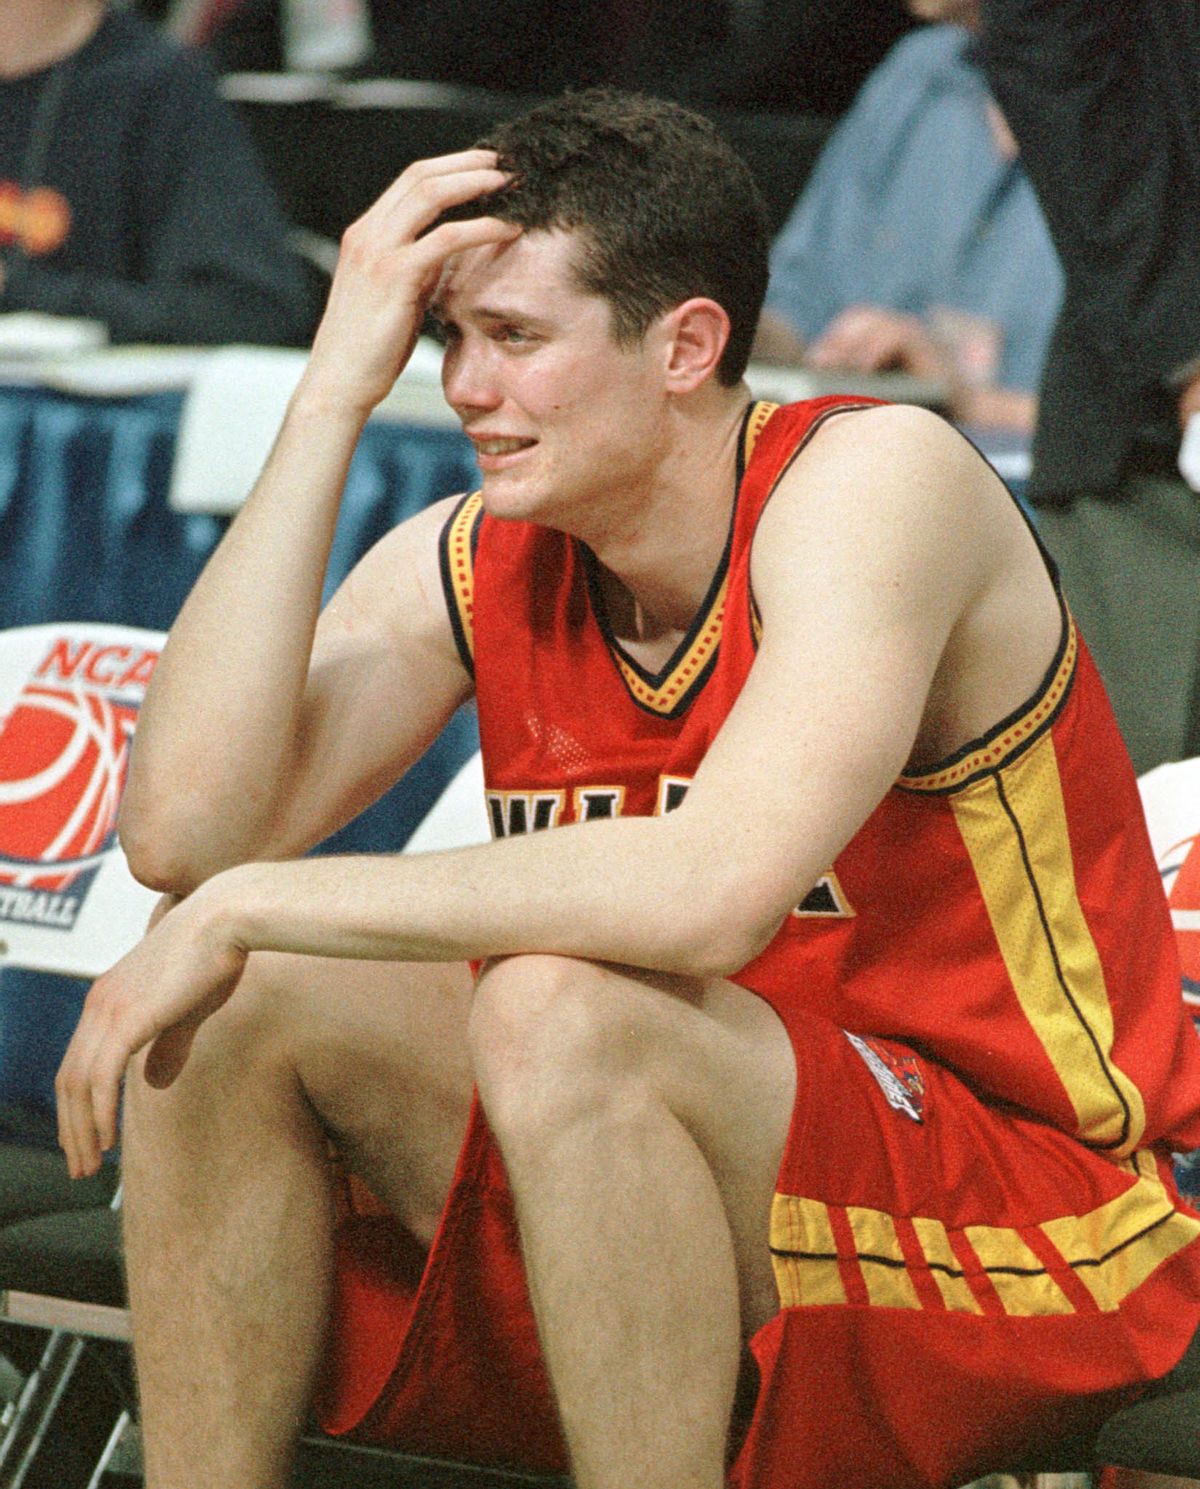 Iowa State University's Paul Shirley reacts during the closing seconds of Iowa State's 75-64 loss to Michigan State University in the NCAA Midwest Regional, March 25 at the Palace in Auburn Hills. Michigan State advances to the NCAA Final Four in Indianapolis. jch/Photo by John C.

JCH/HB (Reuters)